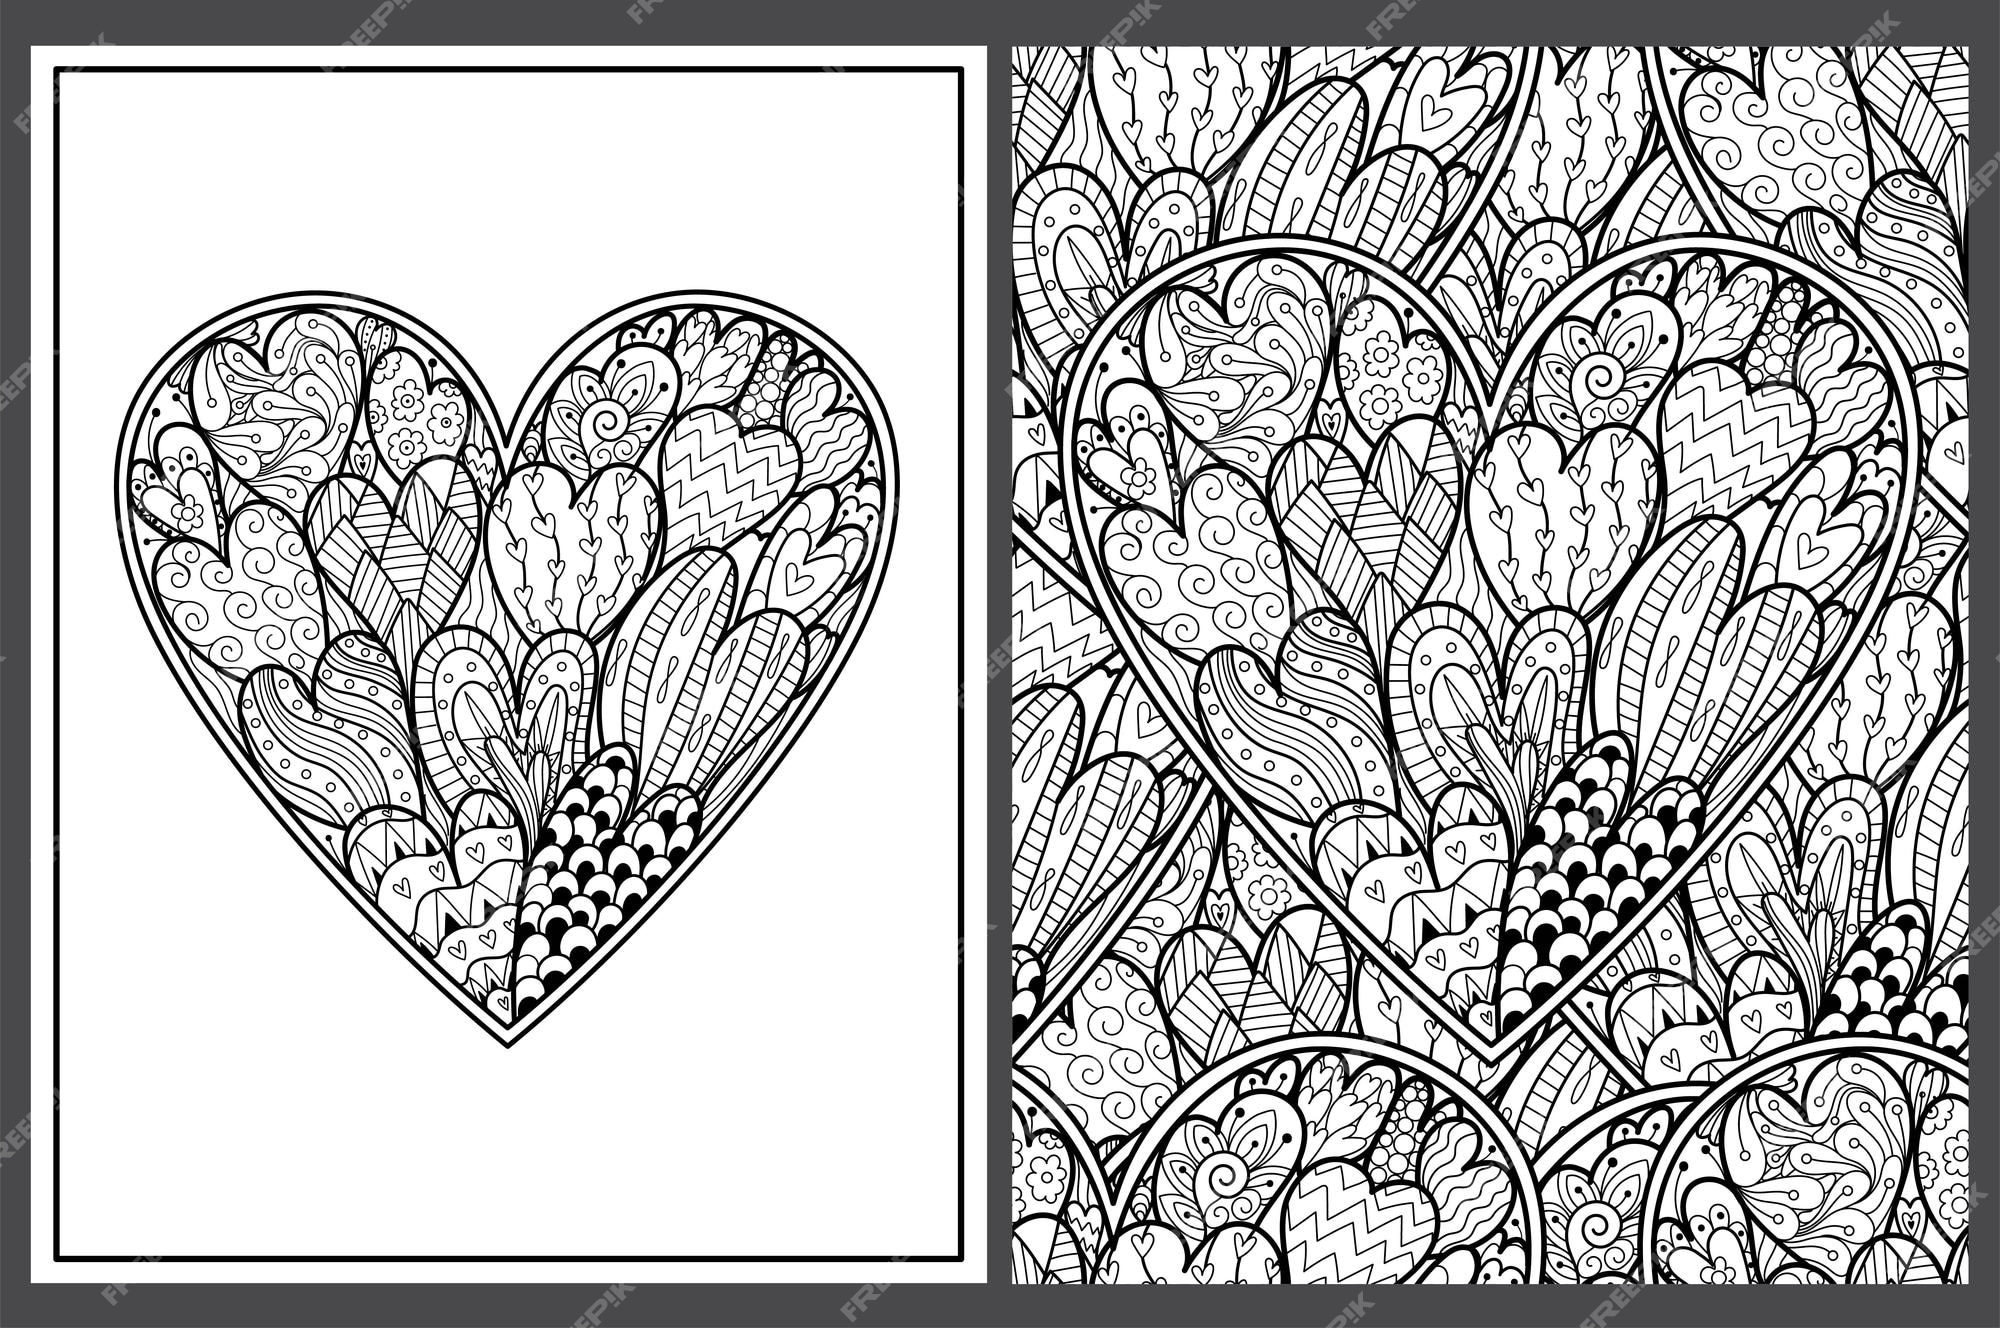 Premium vector doodle heart coloring pages set in us letter format black and white valentines day patterns